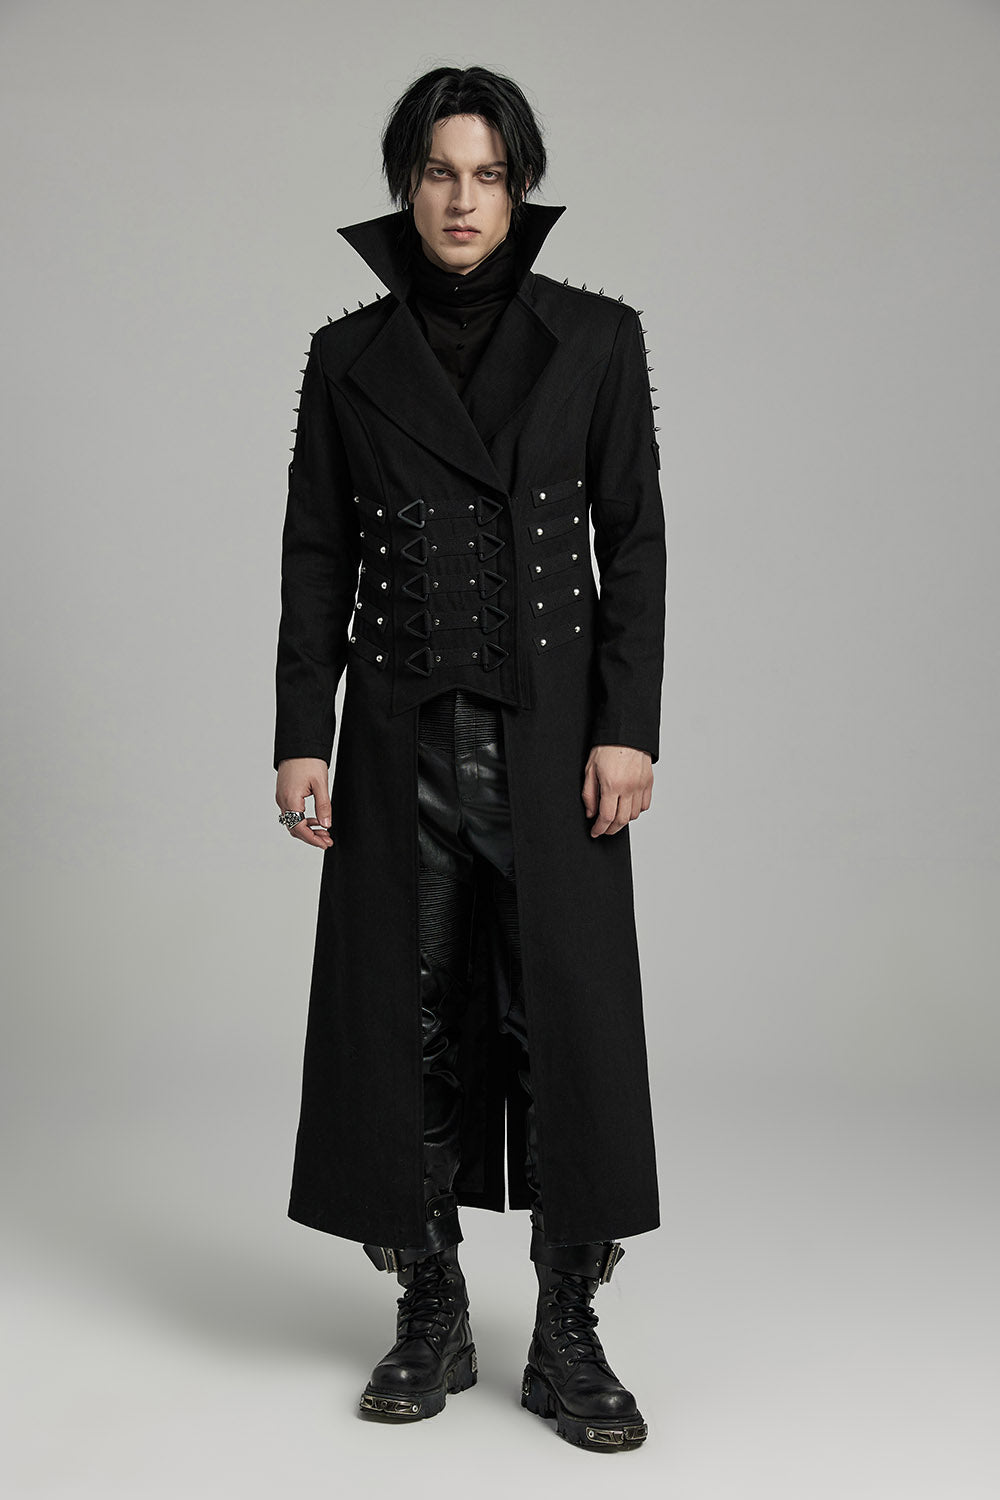 mens gothic spiked shoulder trench coat